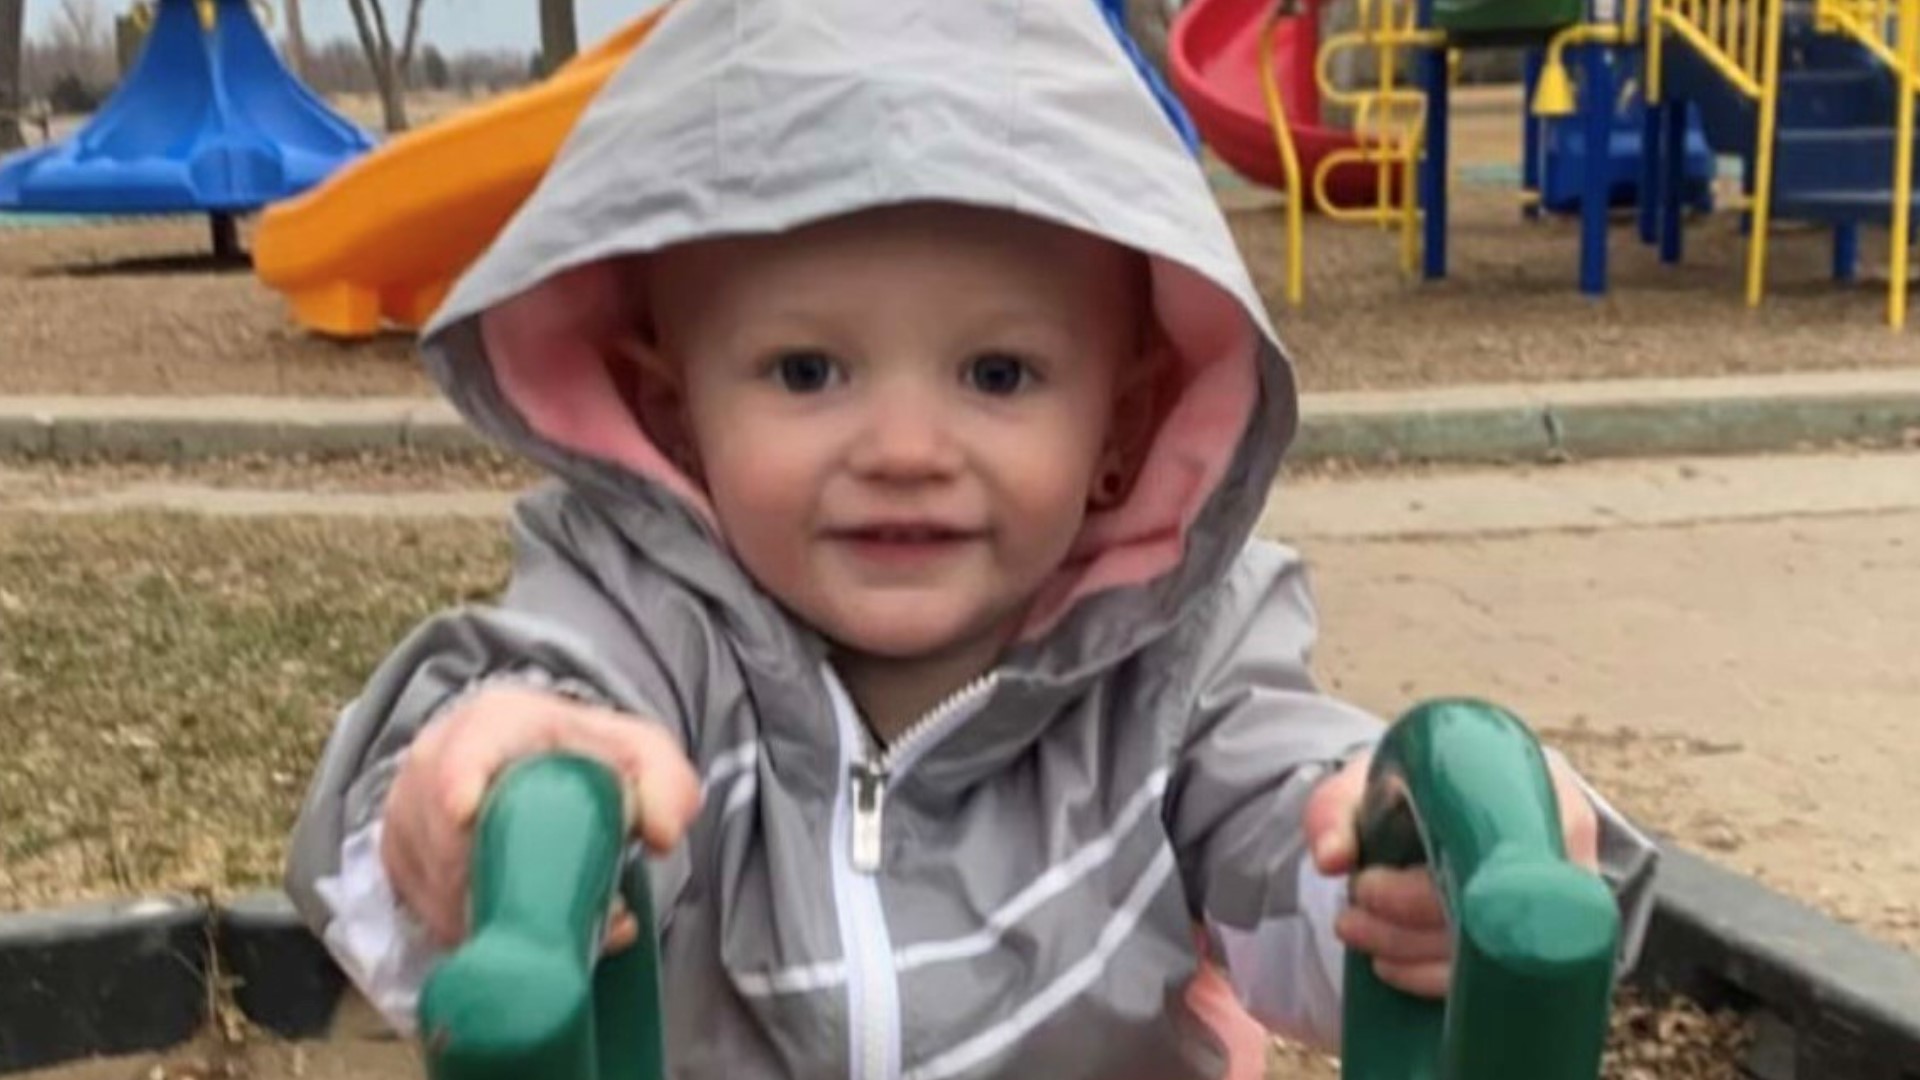 After repeated visits to doctors in South Dakota, 2-year-old Baelyn was sent to the Twin Cities where her parents learned she had unexplained, severe hepatitis.